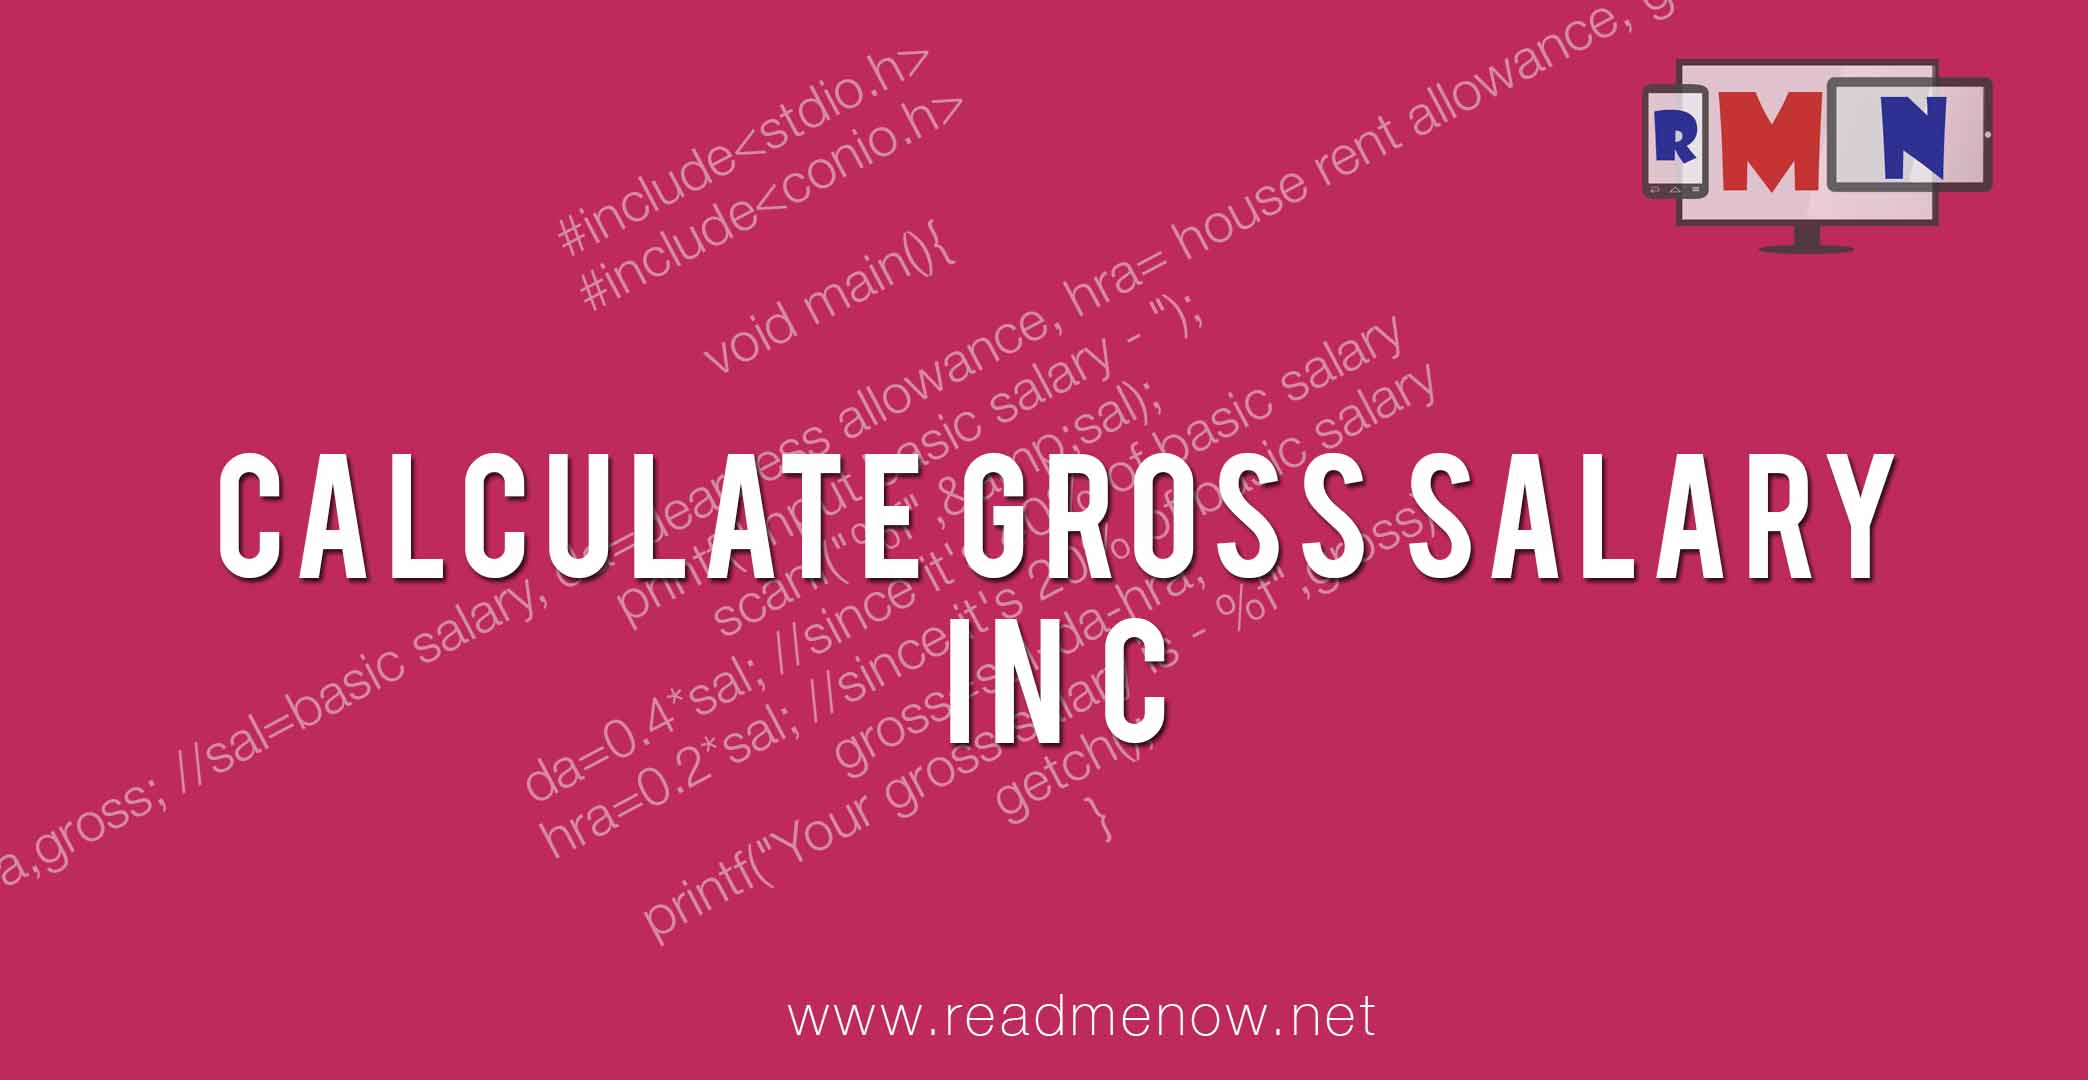 Calculate gross salary in C